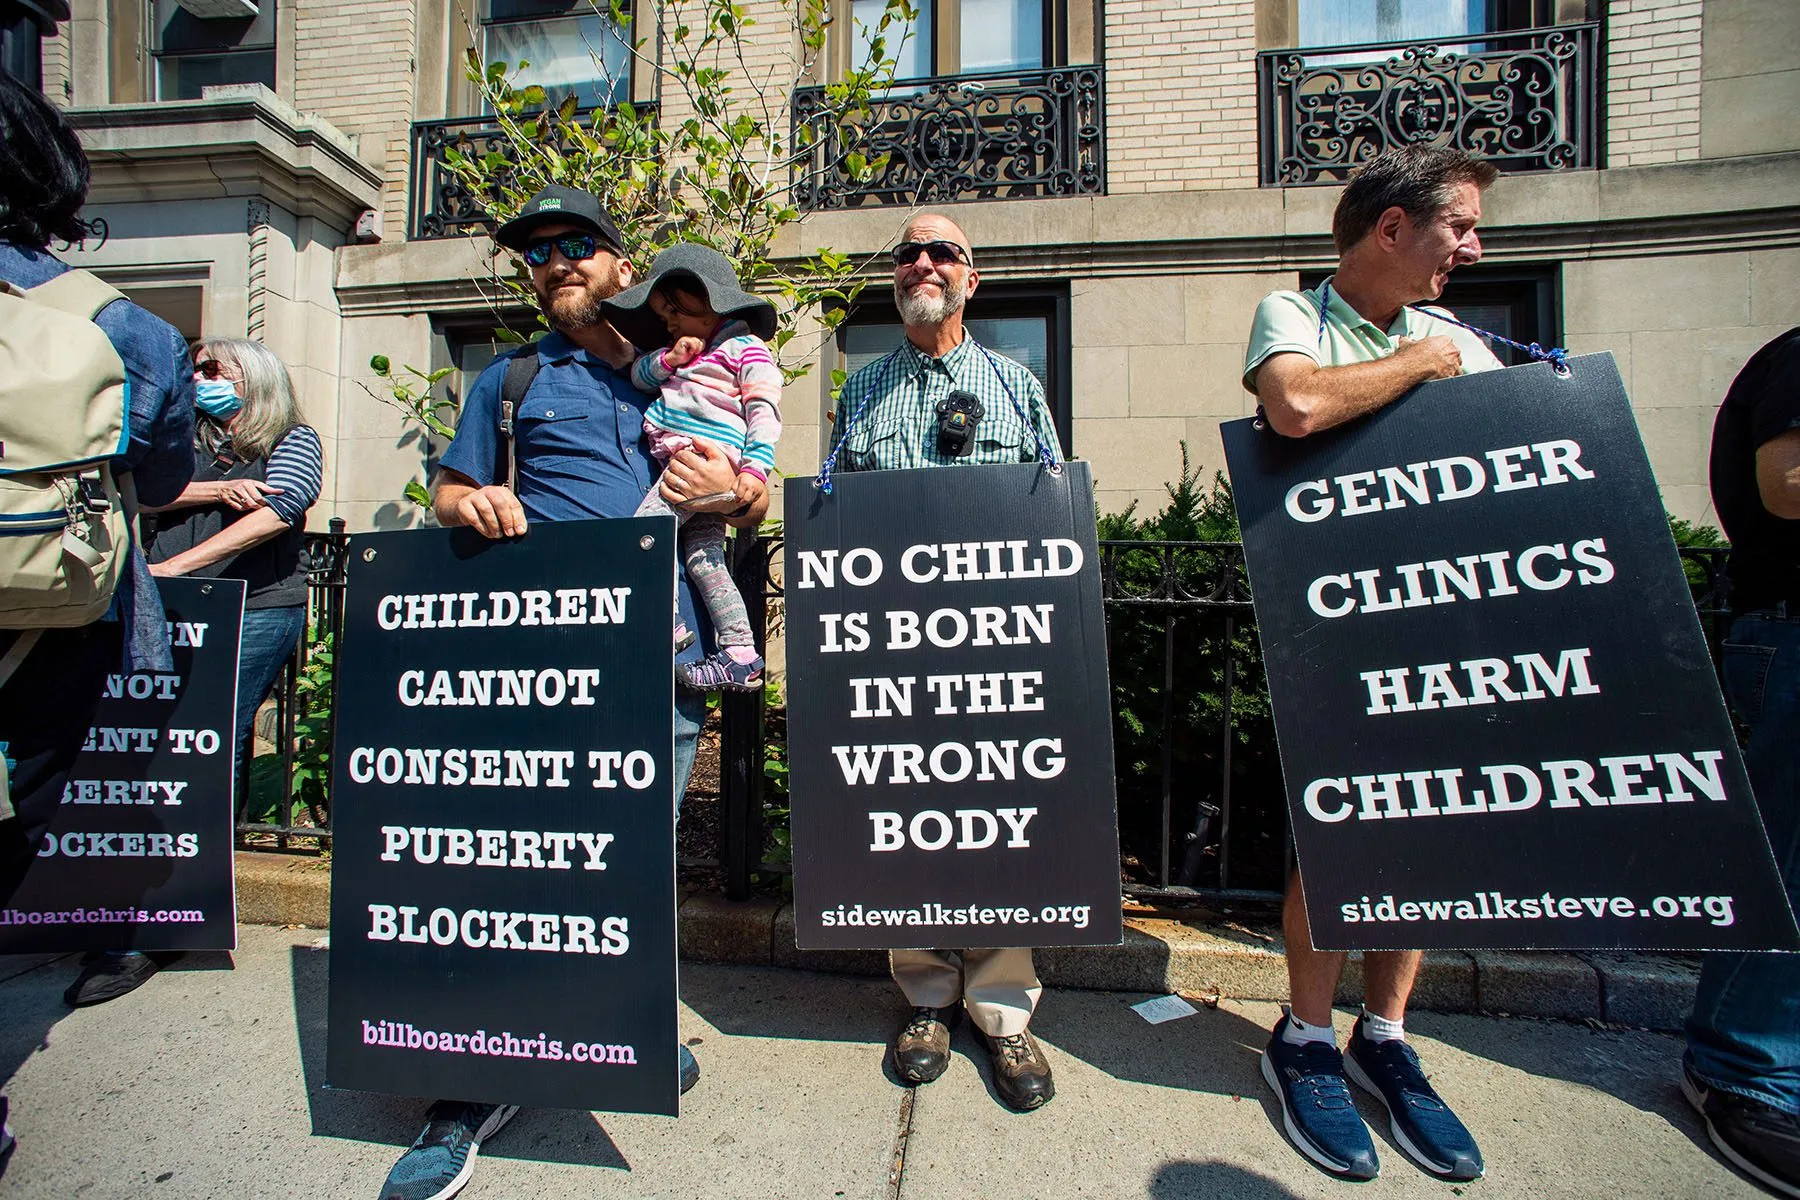 Anti-trans activists wear signs that read "children cannot consent to puberty blockers," "no child is born in the wrong body," and "gender clinics harm children" outside Boston Children's Hospital.